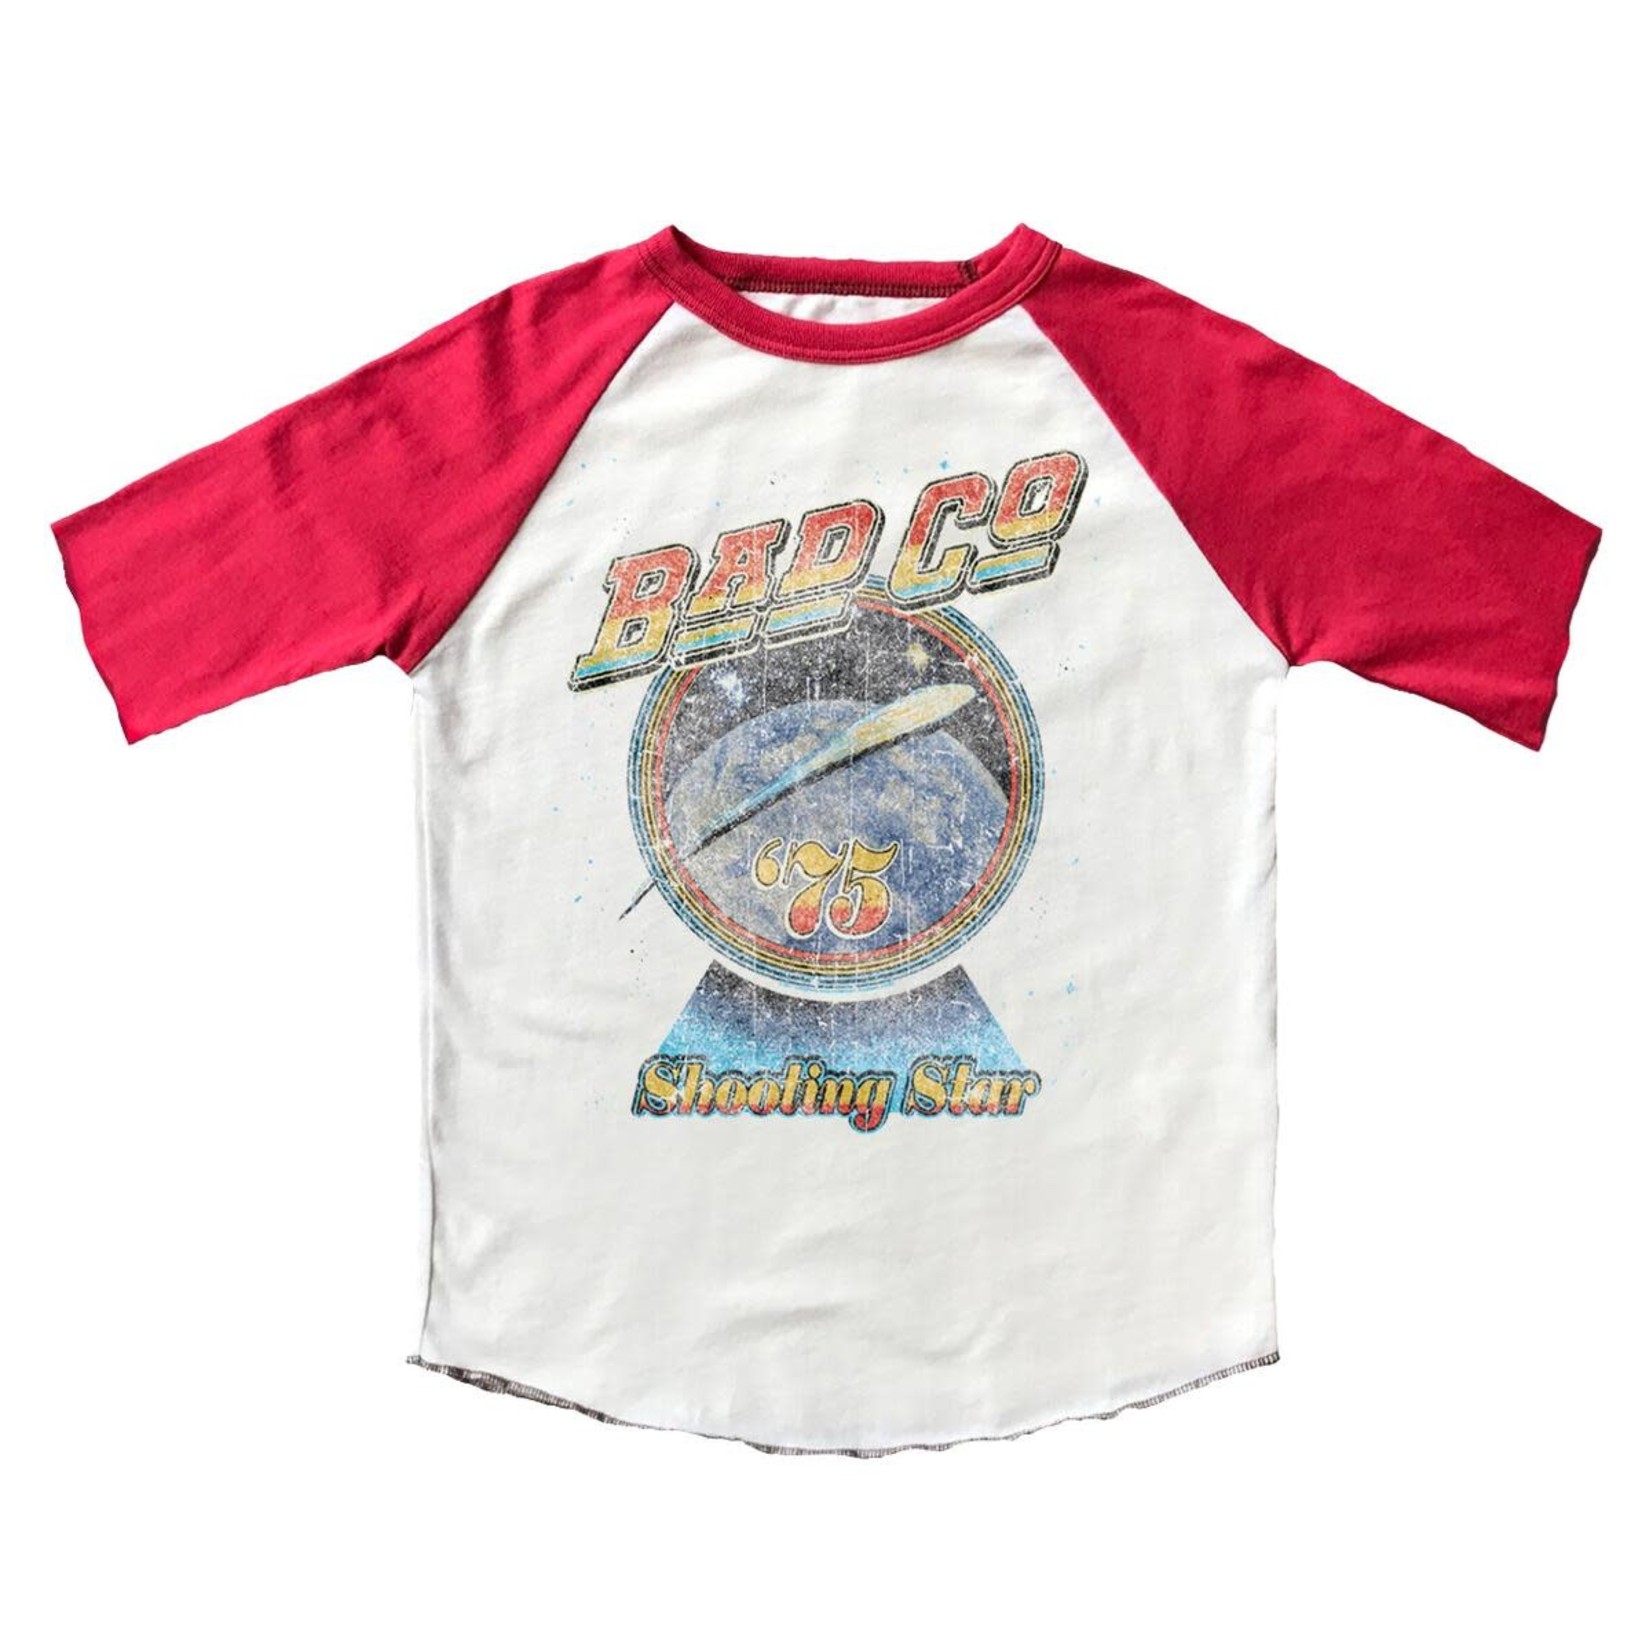 Rowdy Sprout Cream/Red Bad Company S/S Raglan Tee